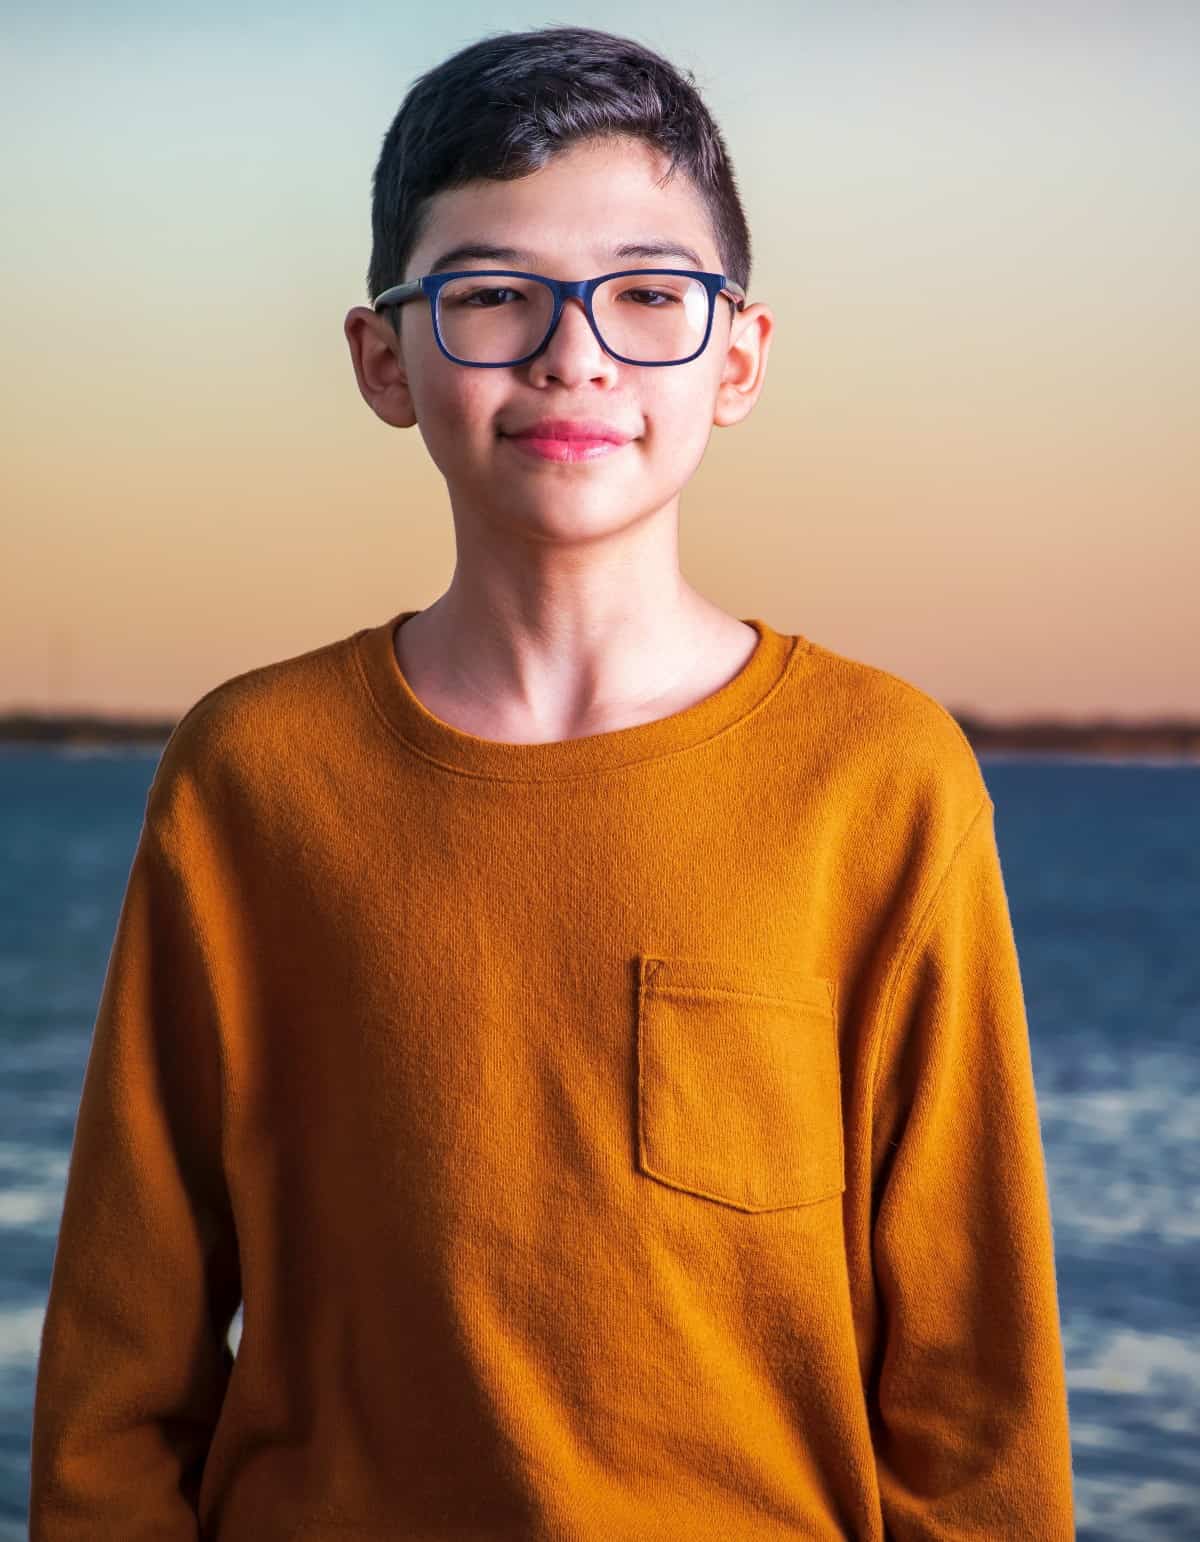 A young boy wearing glasses and smiling at the camera.